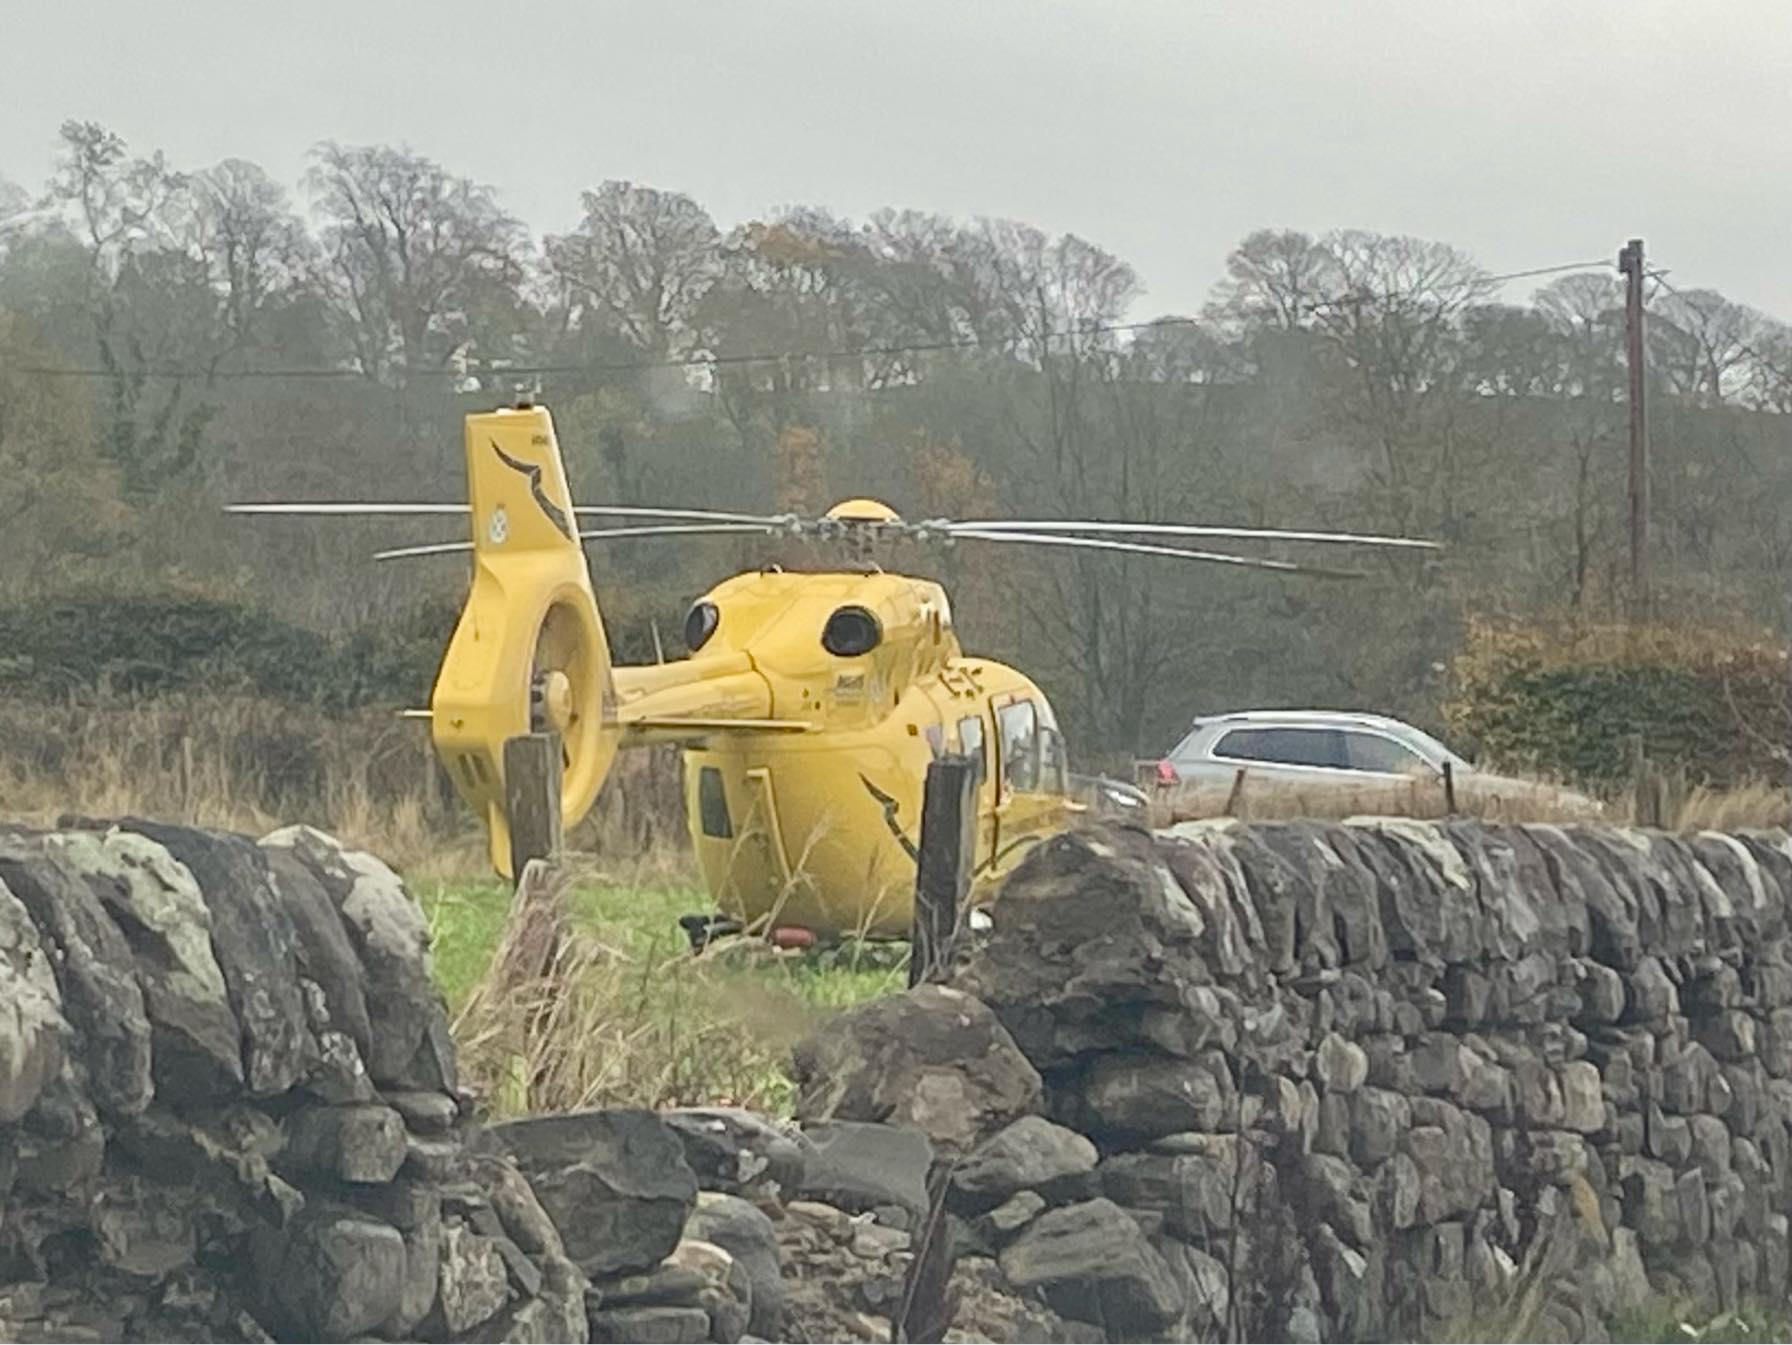 An air ambulance was also in attendance at the scene.